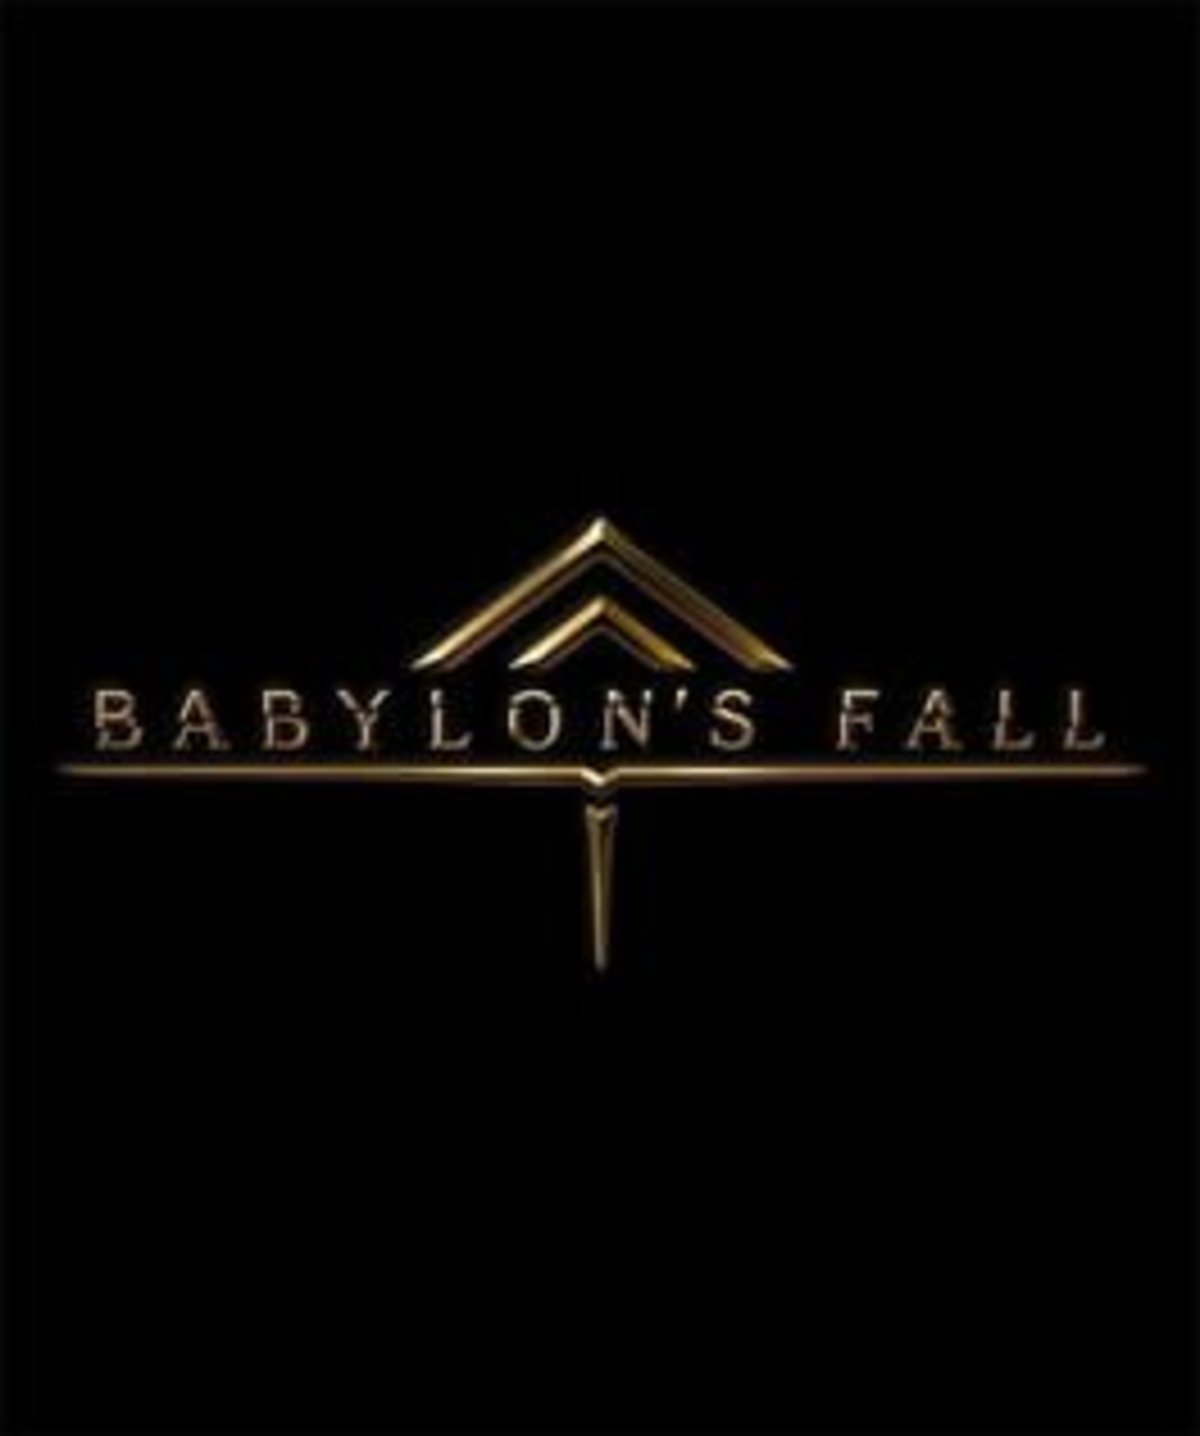 Babylon's Fall reveals the date of its first closed beta